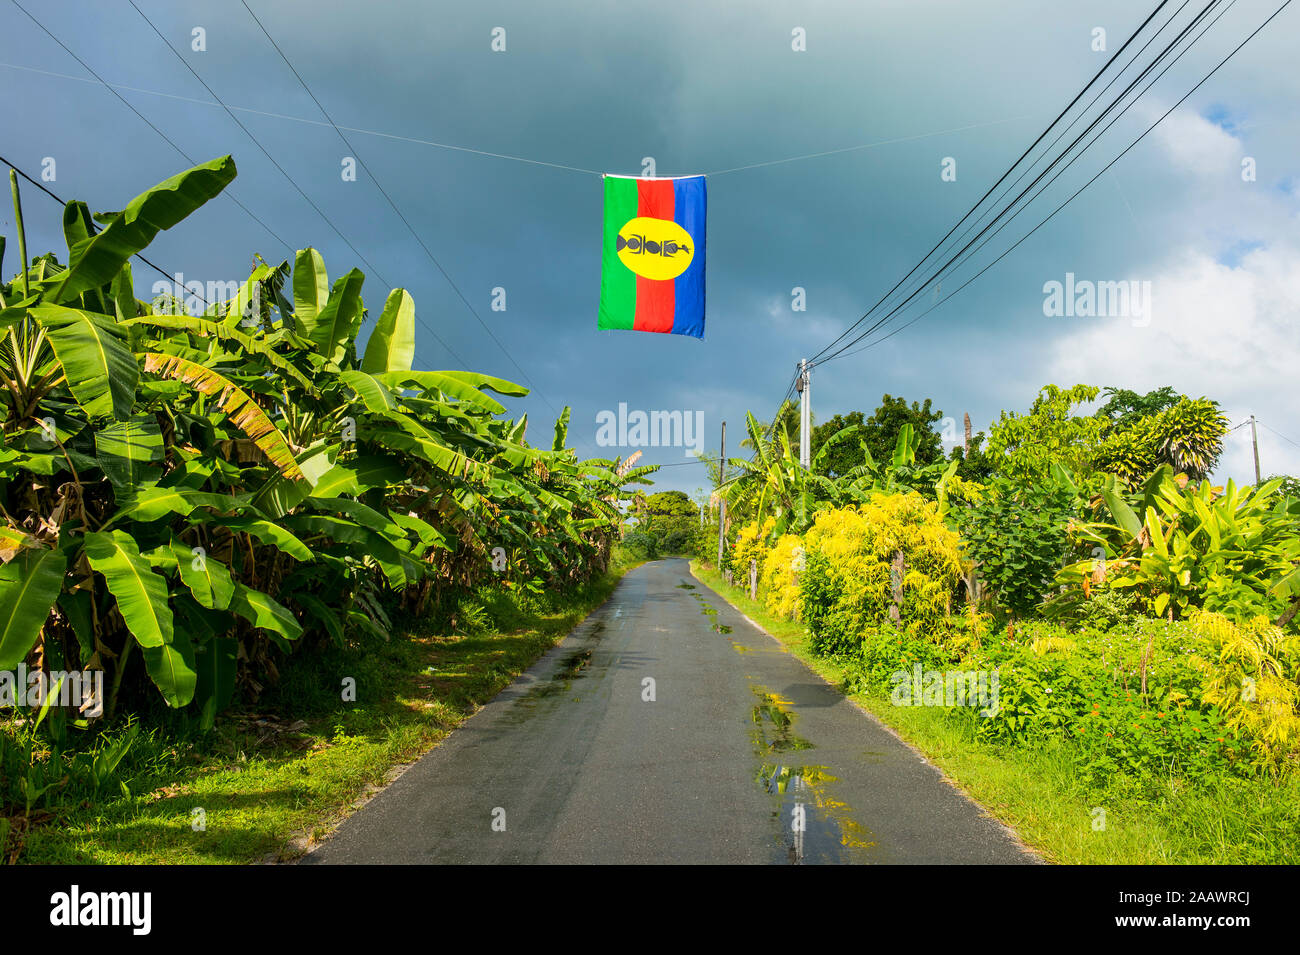 Karnak movement flag over road by trees in Ouvea, Loyalty Islands, New Caledonia Stock Photo